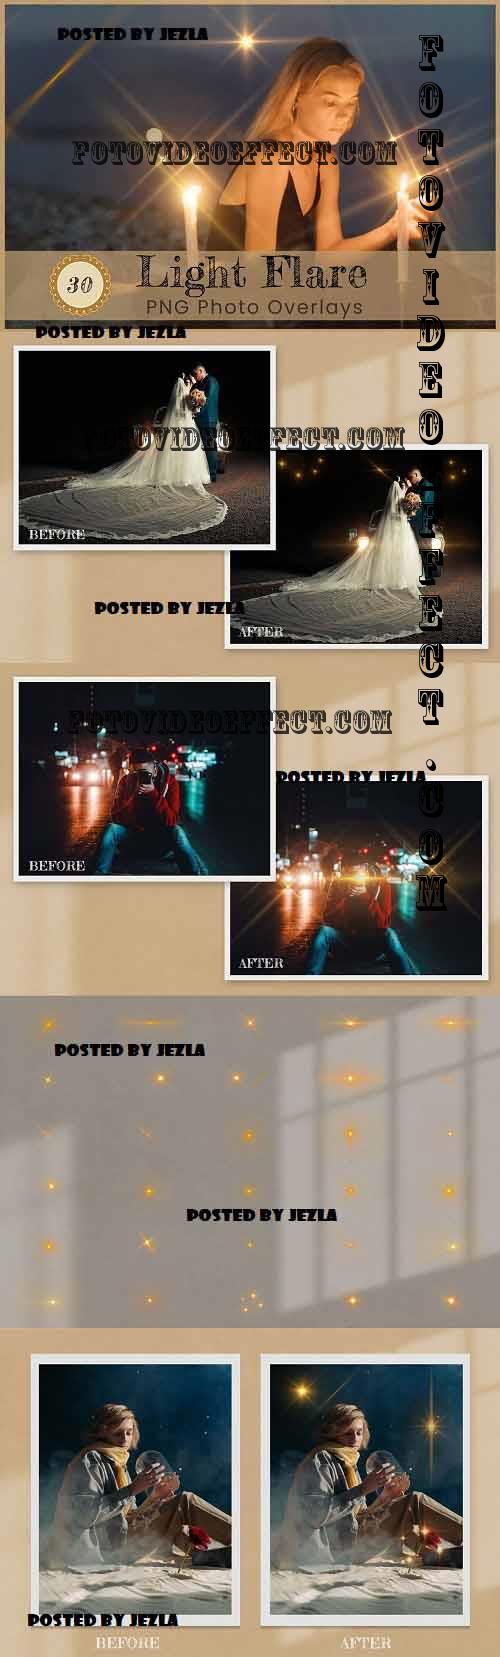 Light Flare Overlay PNG Photography - 7119925